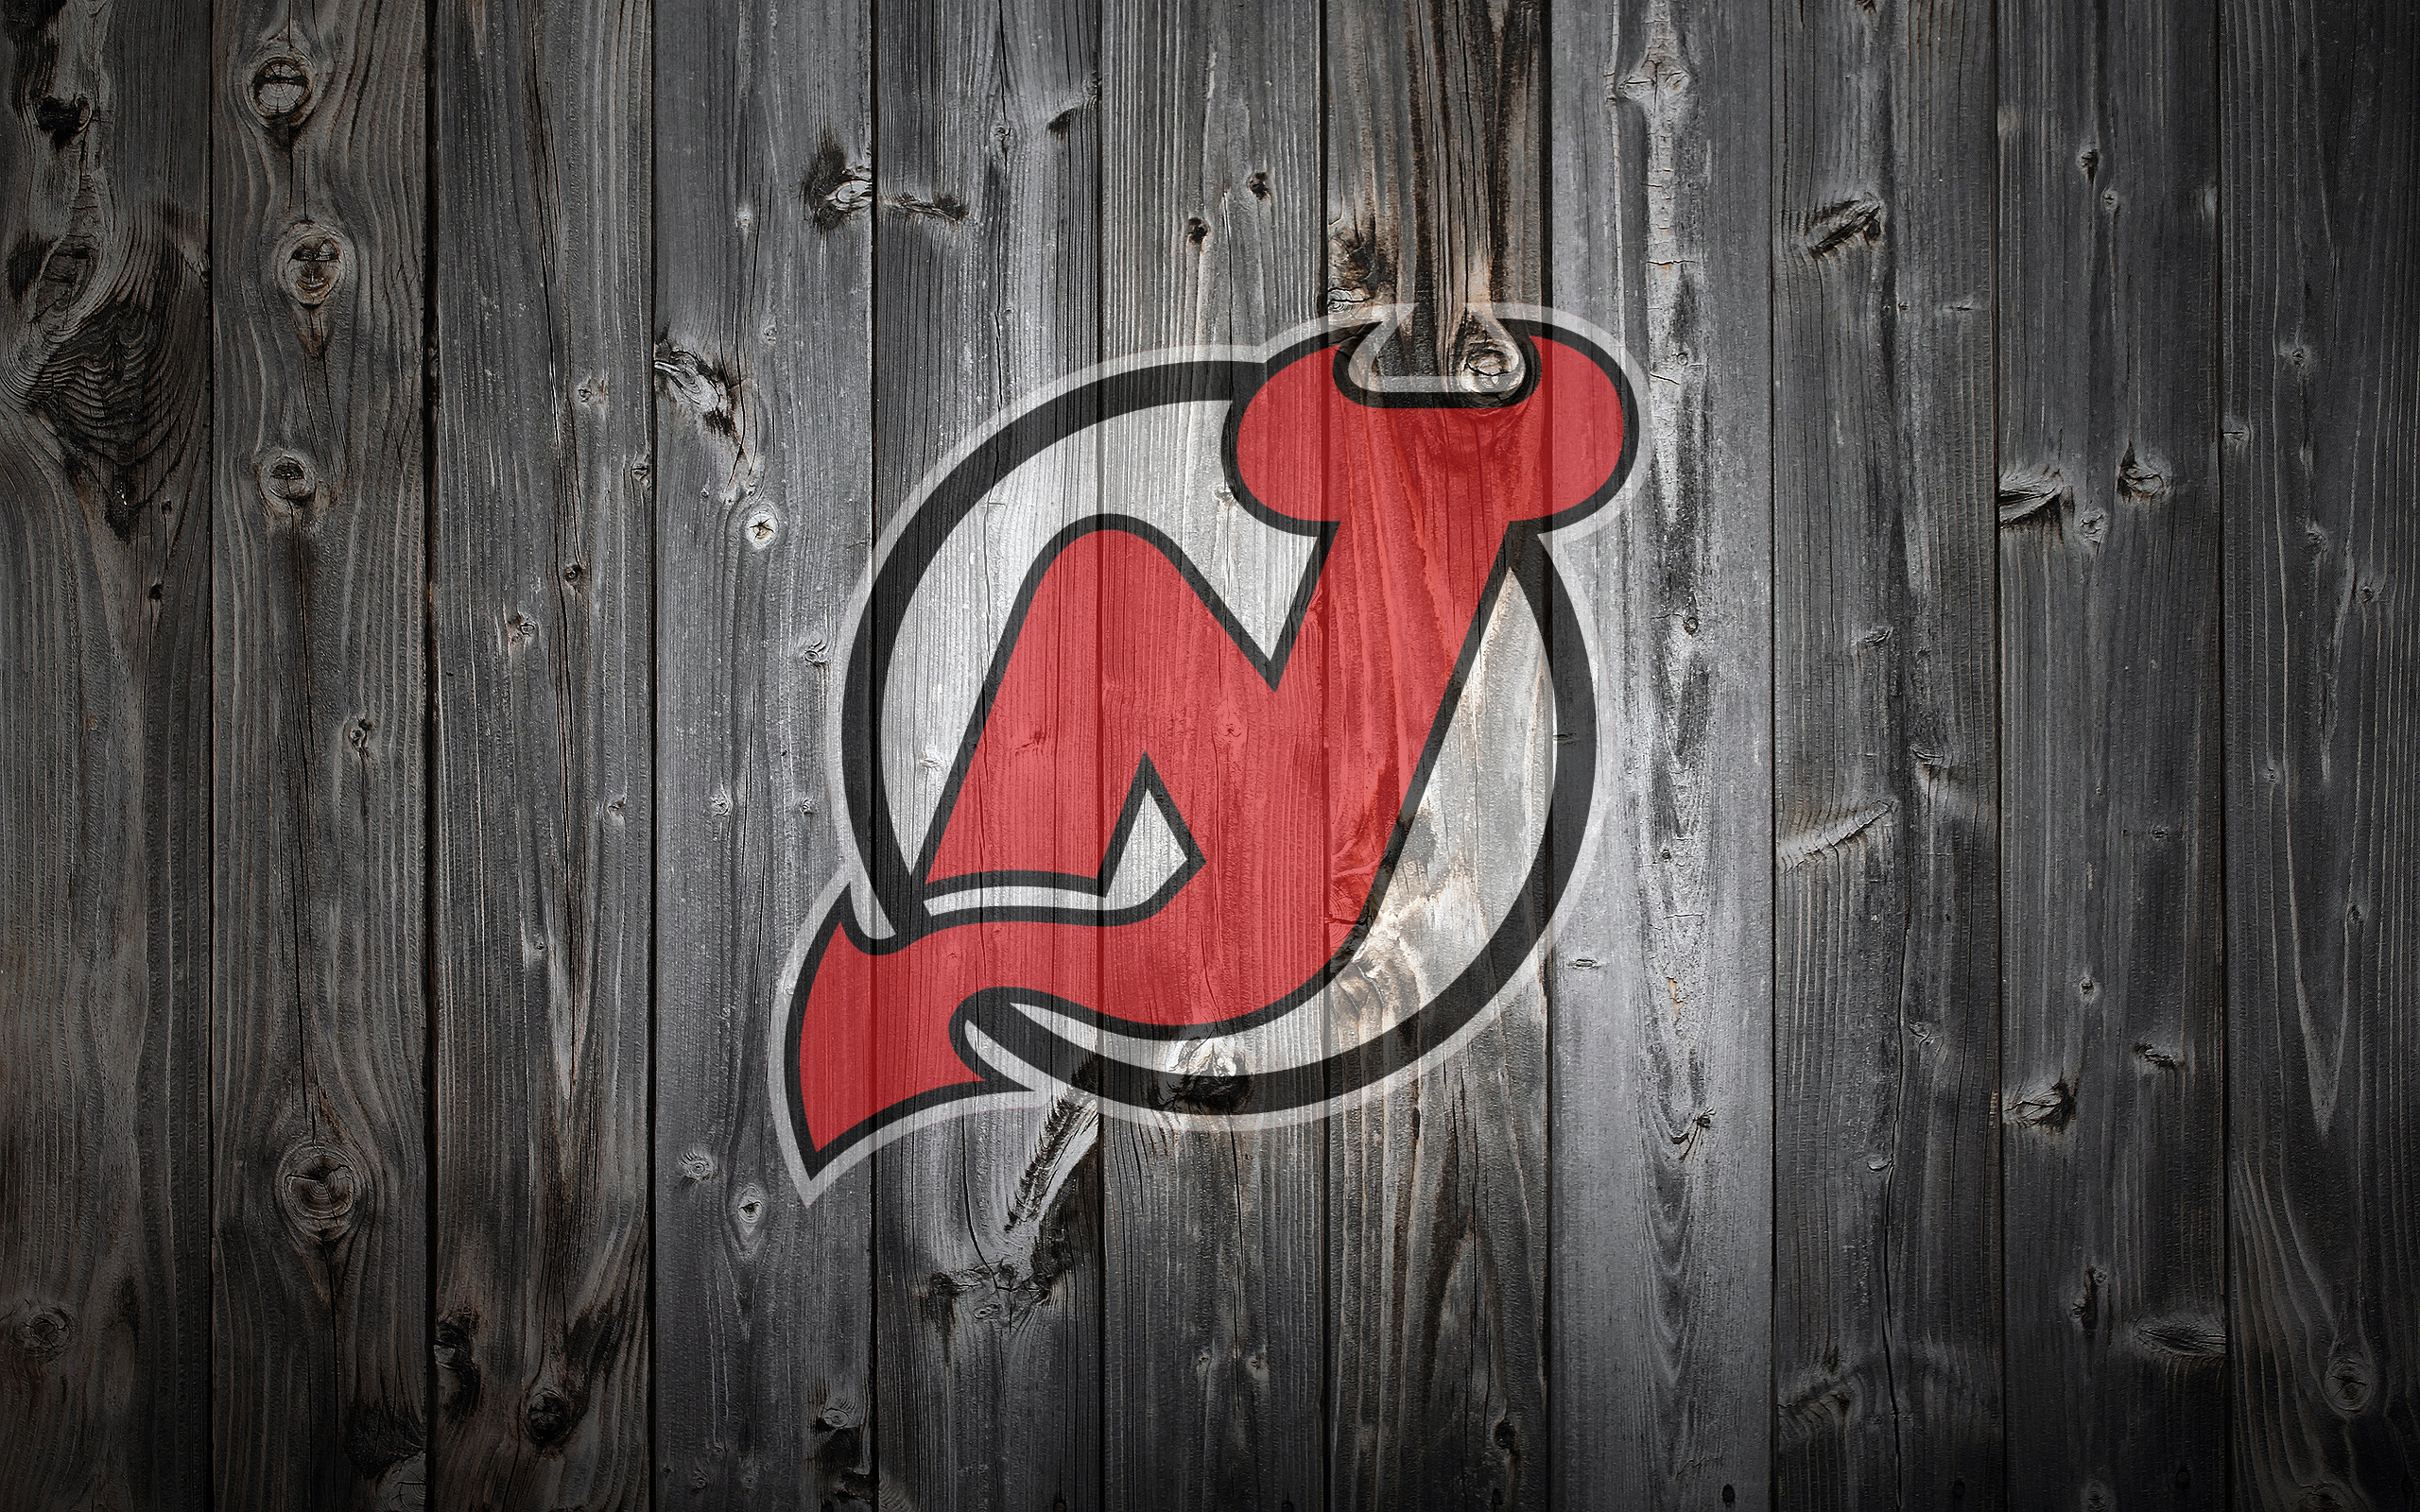 319,368 New Jersey Devils Photos & High Res Pictures - Getty Images